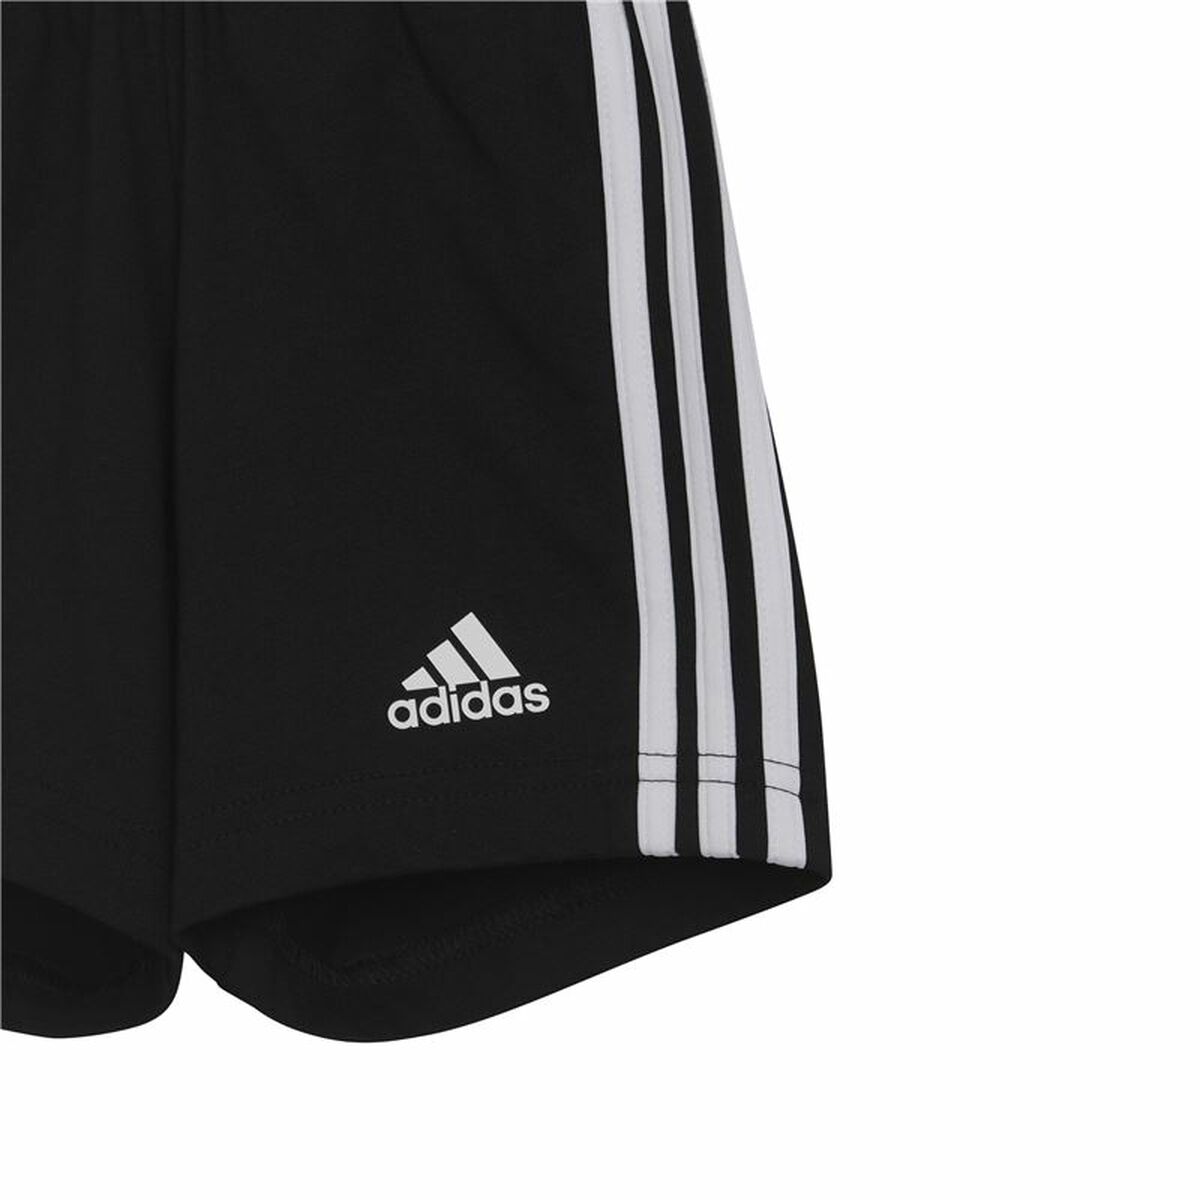 Sports Outfit for Baby Adidas Three Stripes Black White